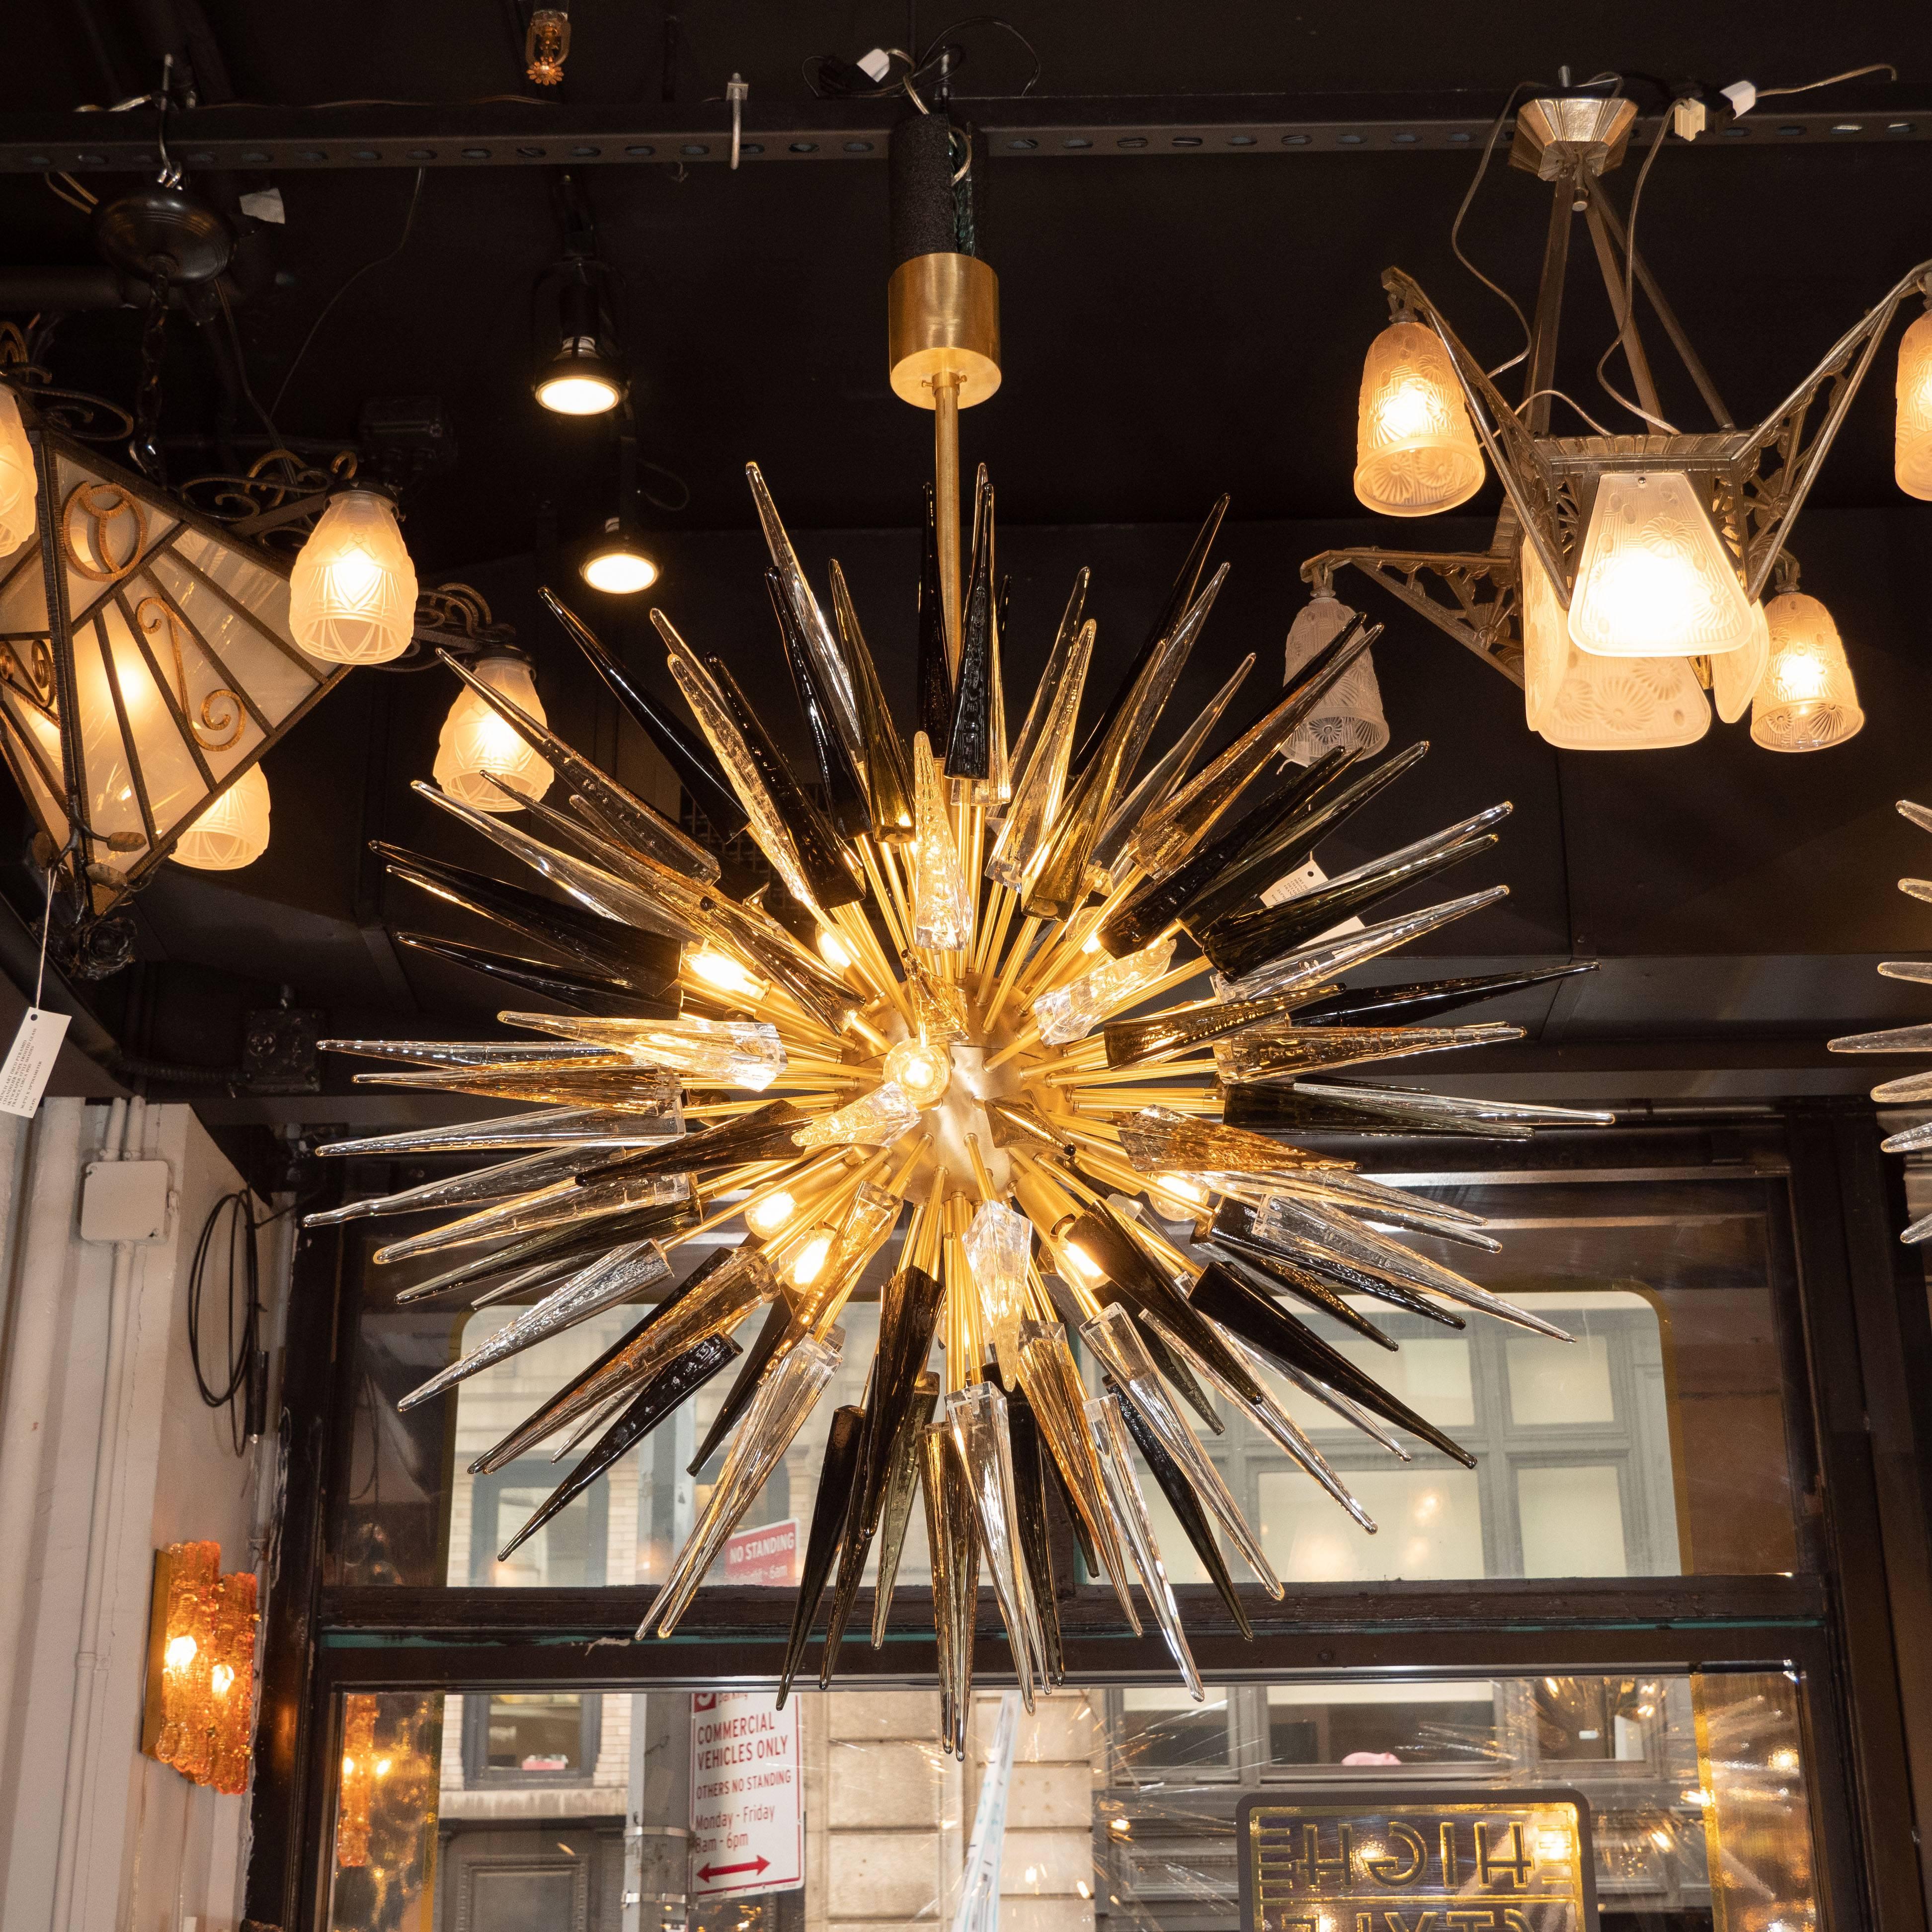 This stunning and graphic modernist chandelier was realized in Murano, Italy- the islands off the coast of Venice renowned for centuries for their superlative quality glass. It features an abundance of hand blown Murano glass obelisks in